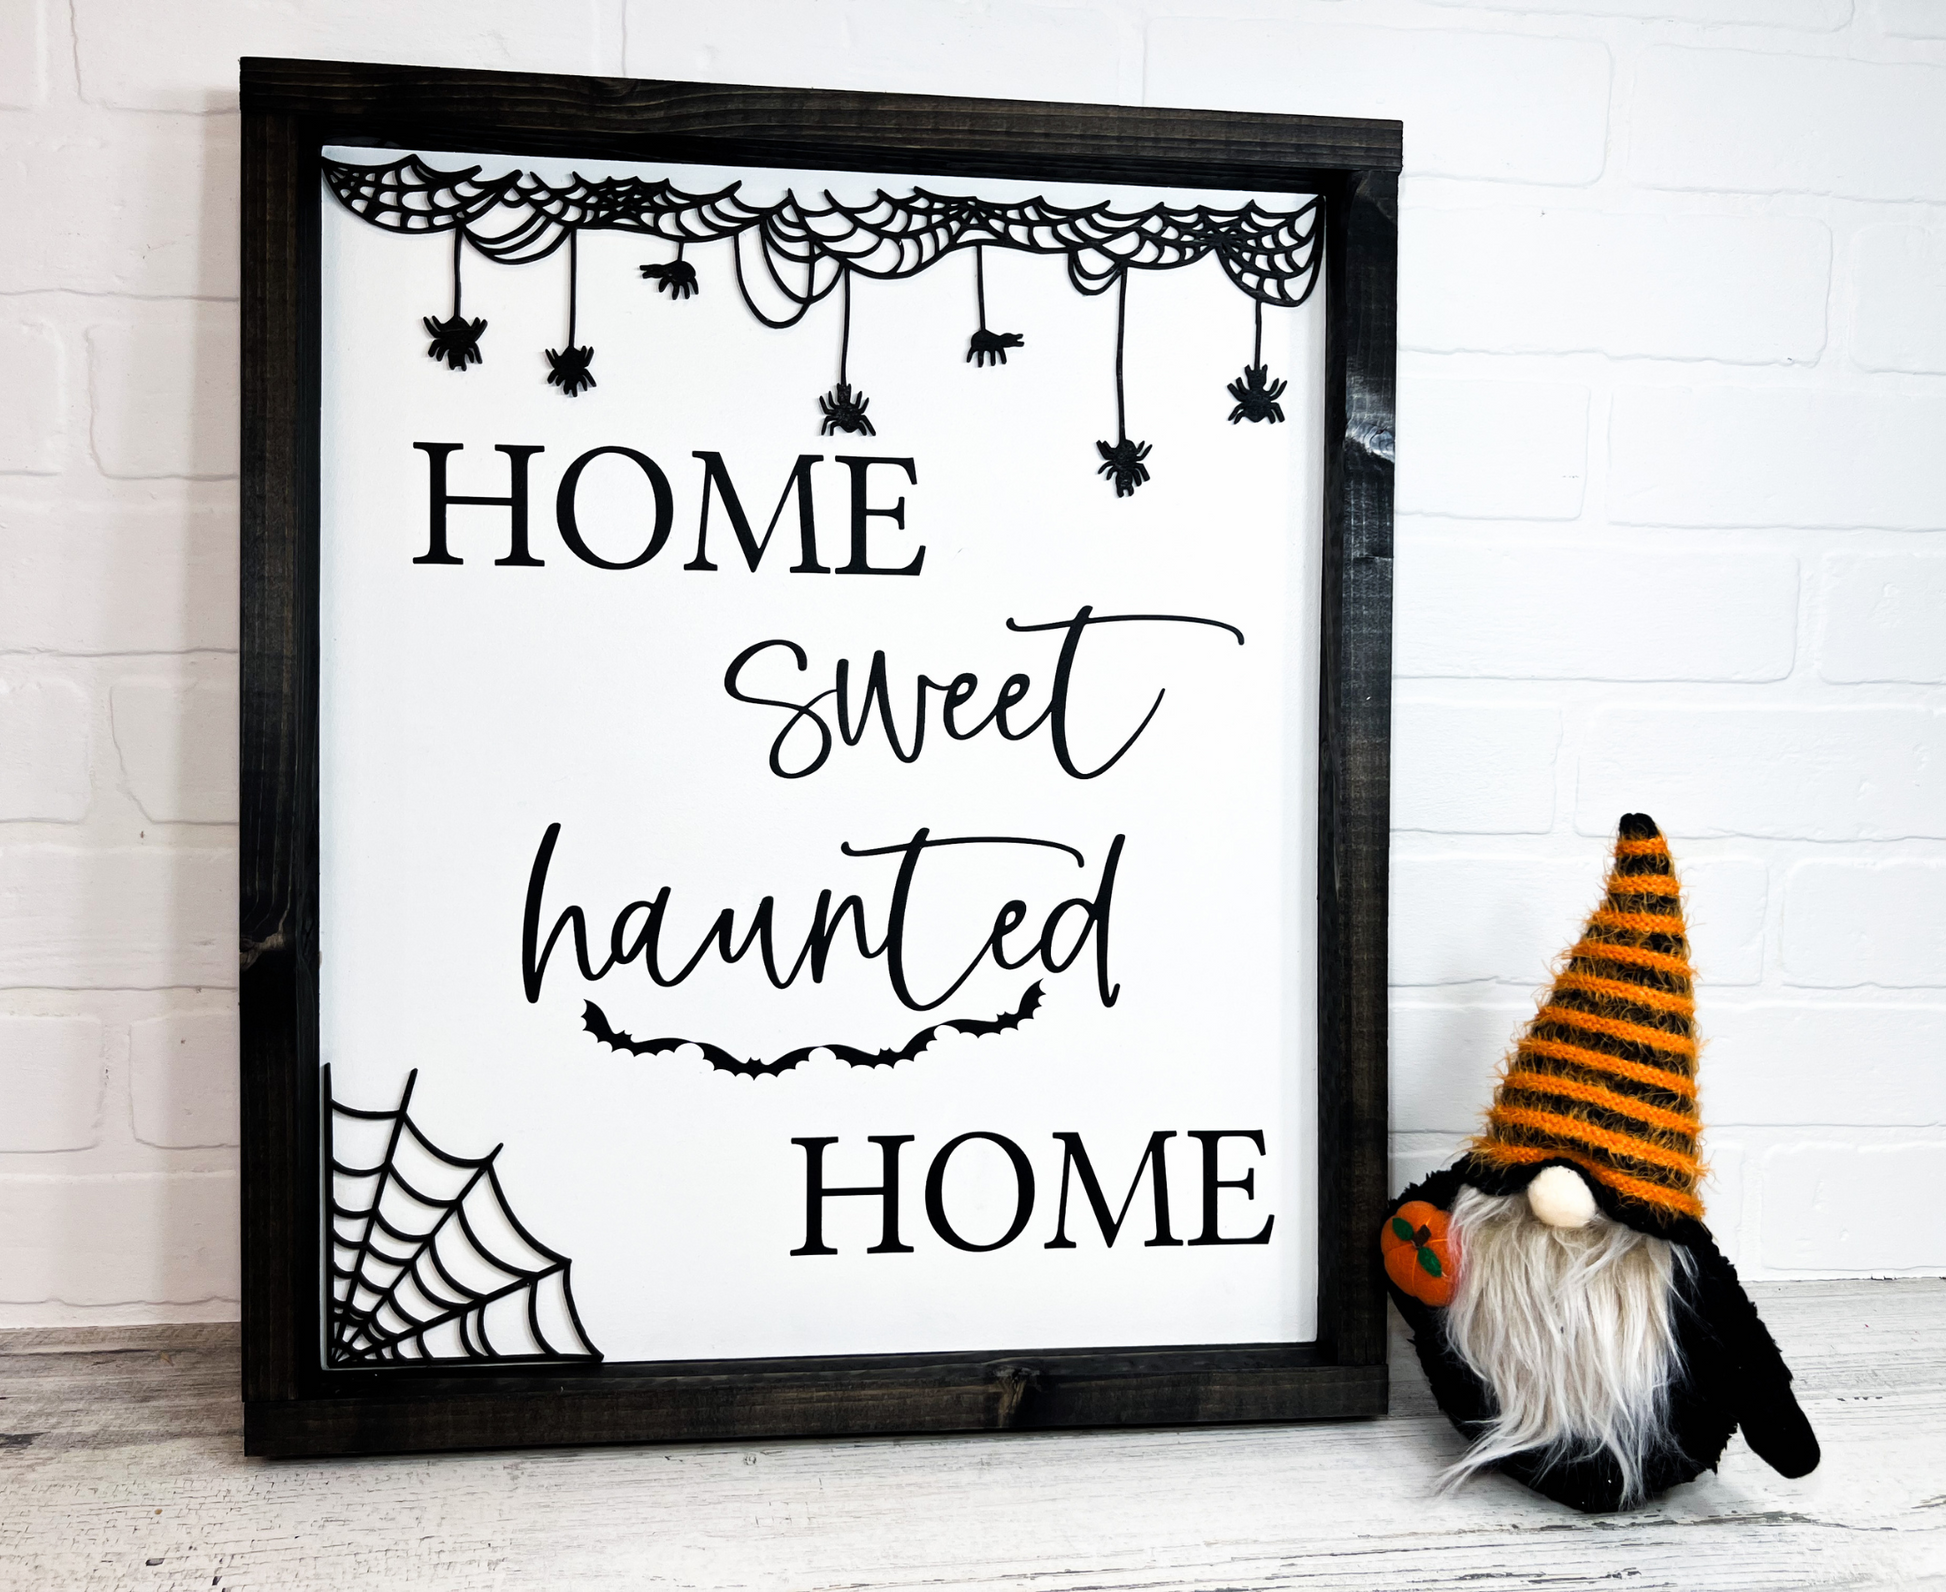 Home Sweet Haunted Home - B-Cozy Home Decor